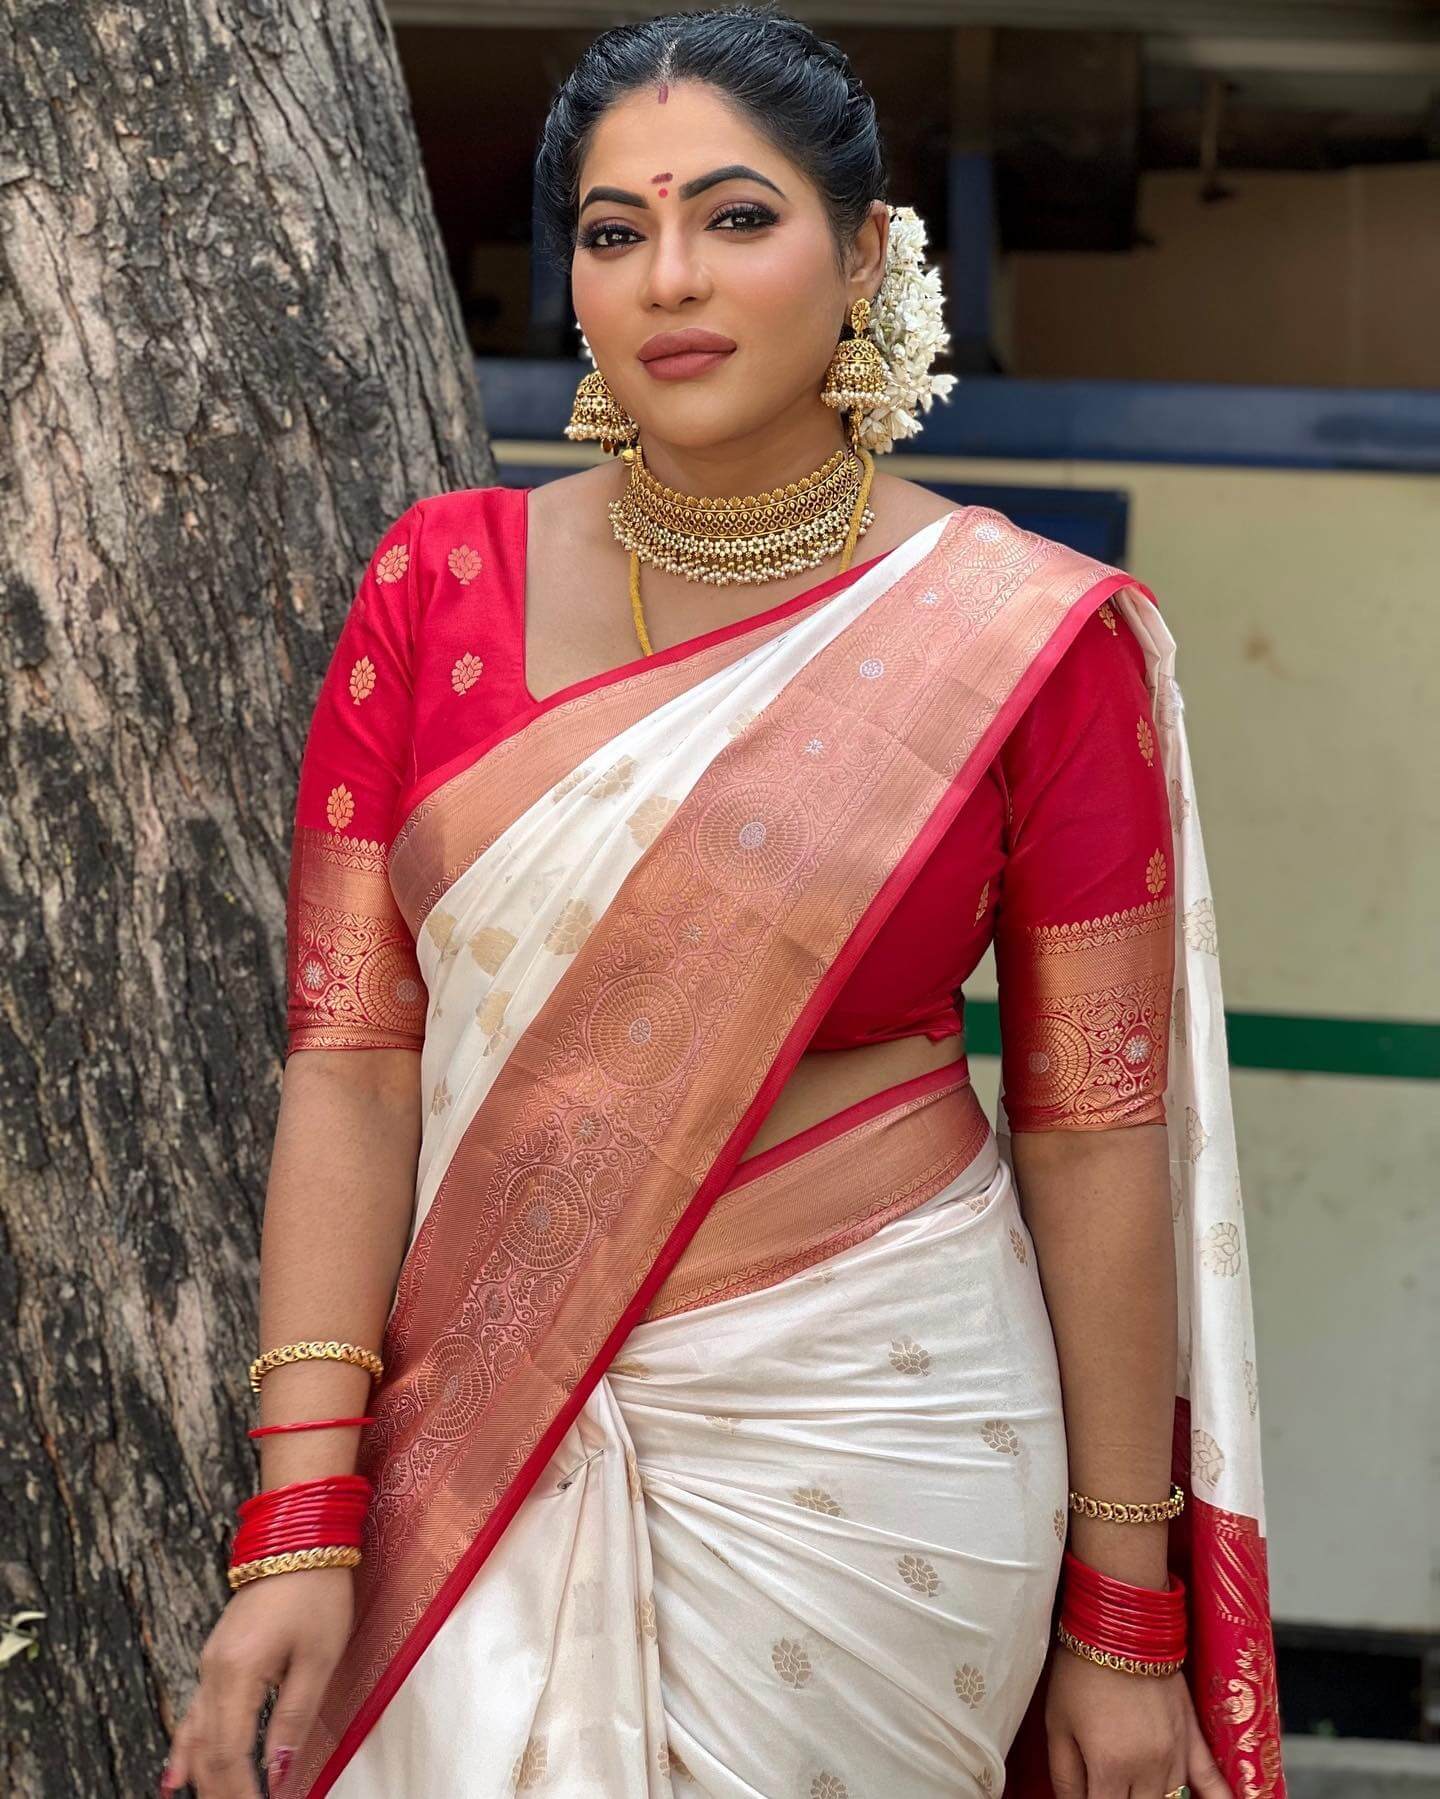 Reshma Pasupuleti Festive Ready Look In Traditional South Indian Saree - Ethnical Saree Outfits & Looks